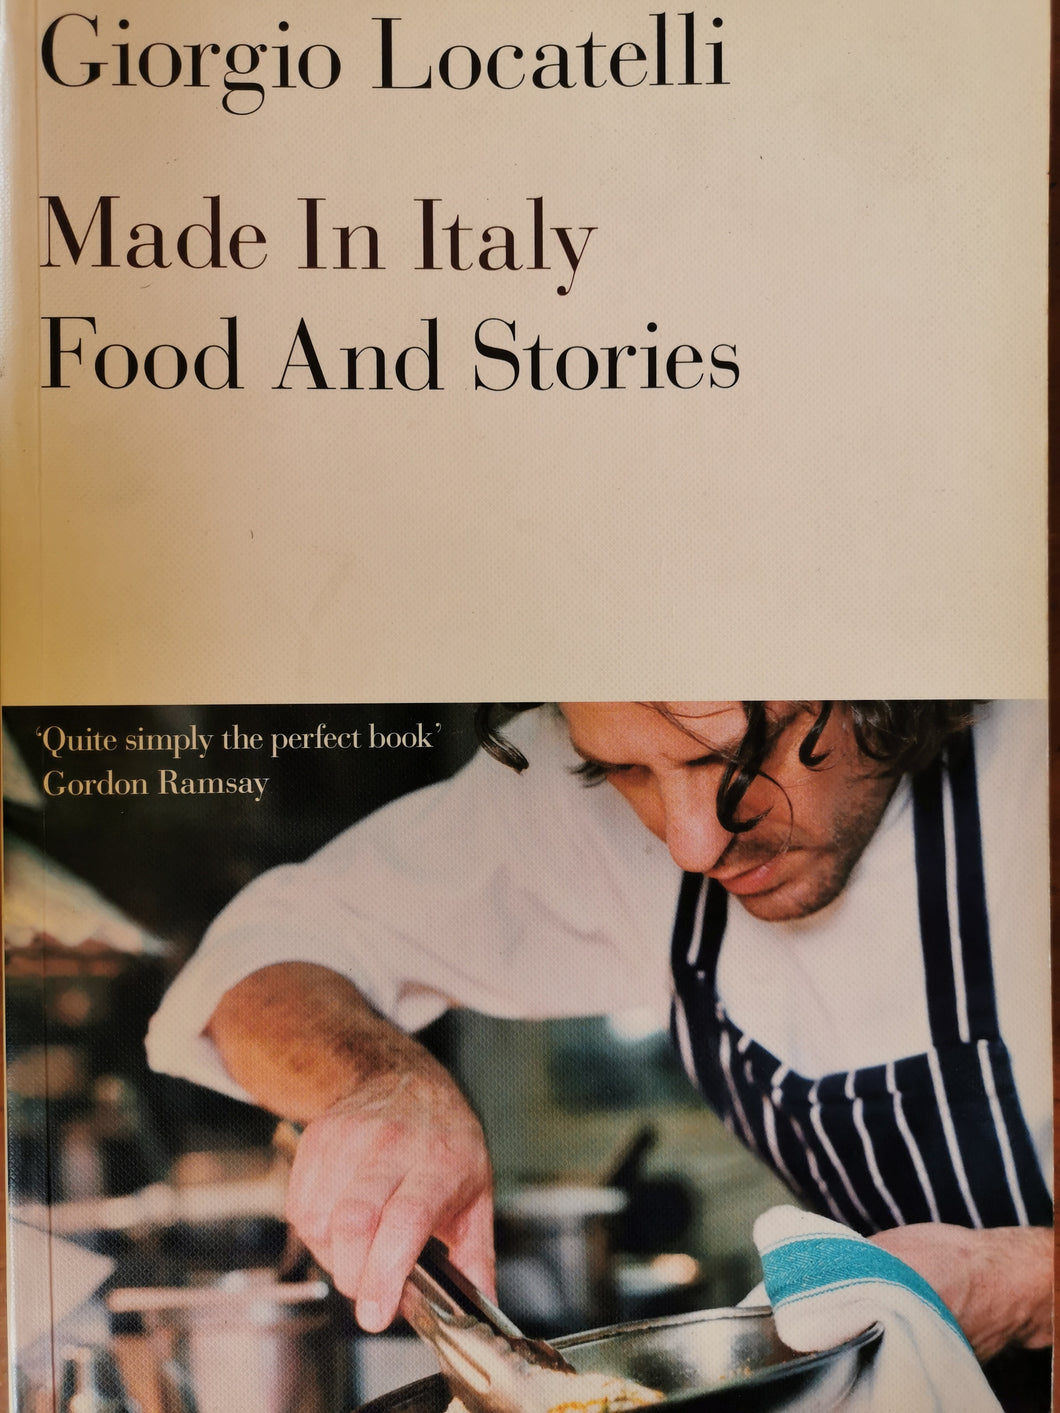 Giorgio Locatelli - Made in Italy: Food and Stories